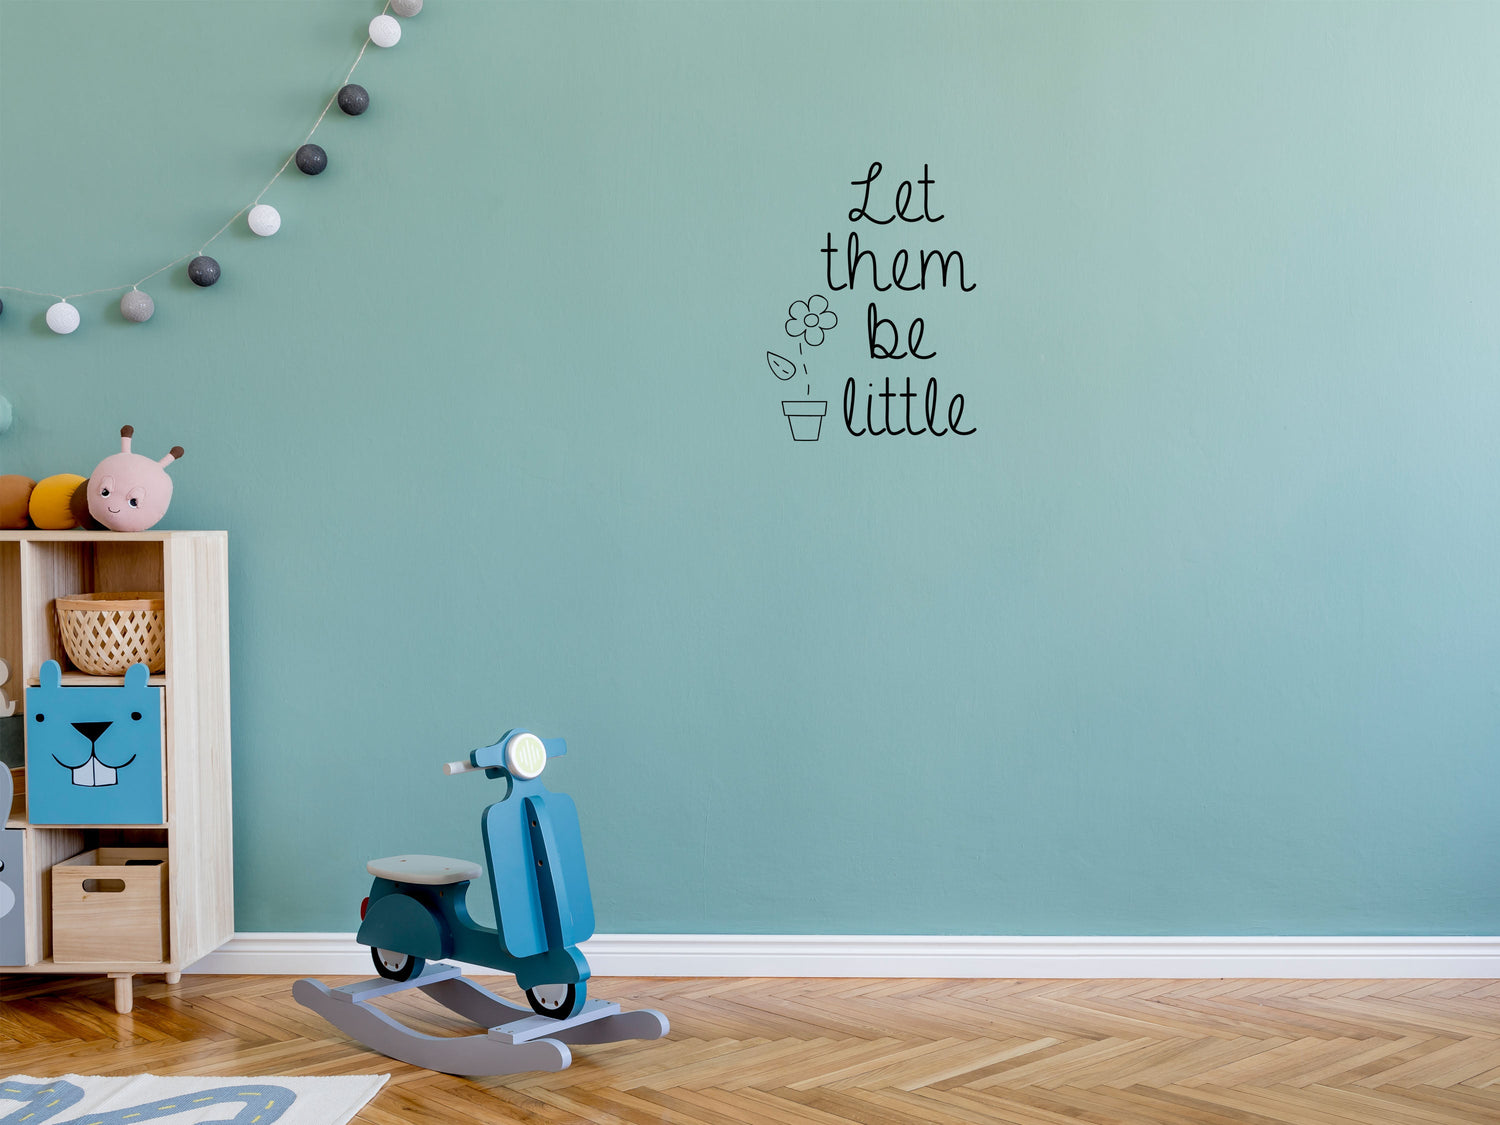 Let Them Be Little - Inspirational Wall Decals Vinyl Wall Decal Inspirational Wall Signs 